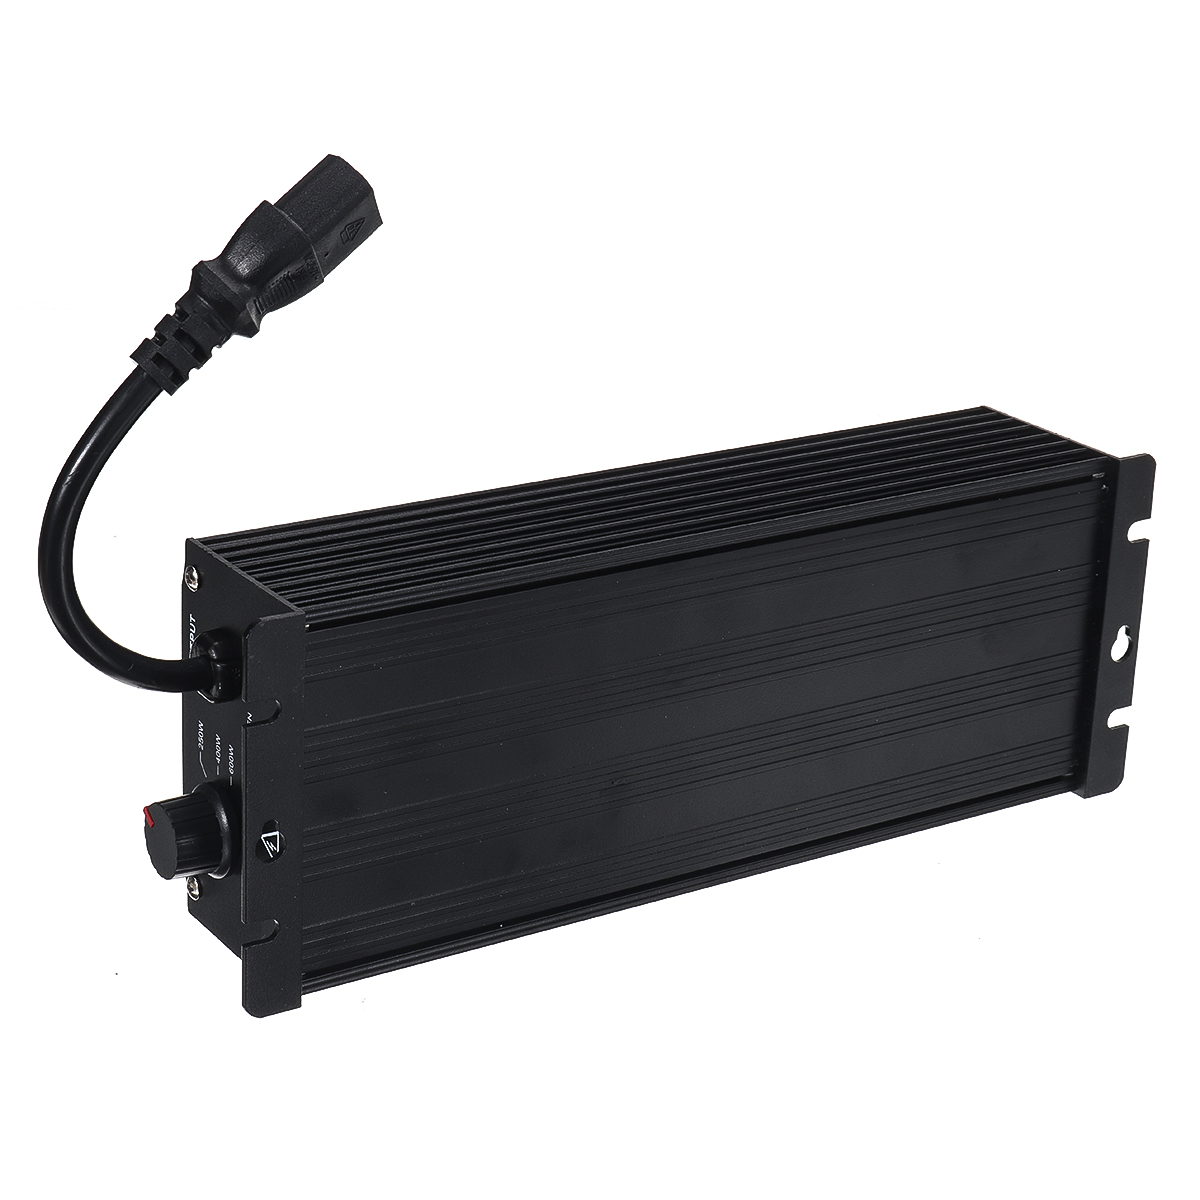 600W-Horticulture-Electronic-Dimmable-Digital-Grow-Light-Ballast-MH-HPS-1892920-7